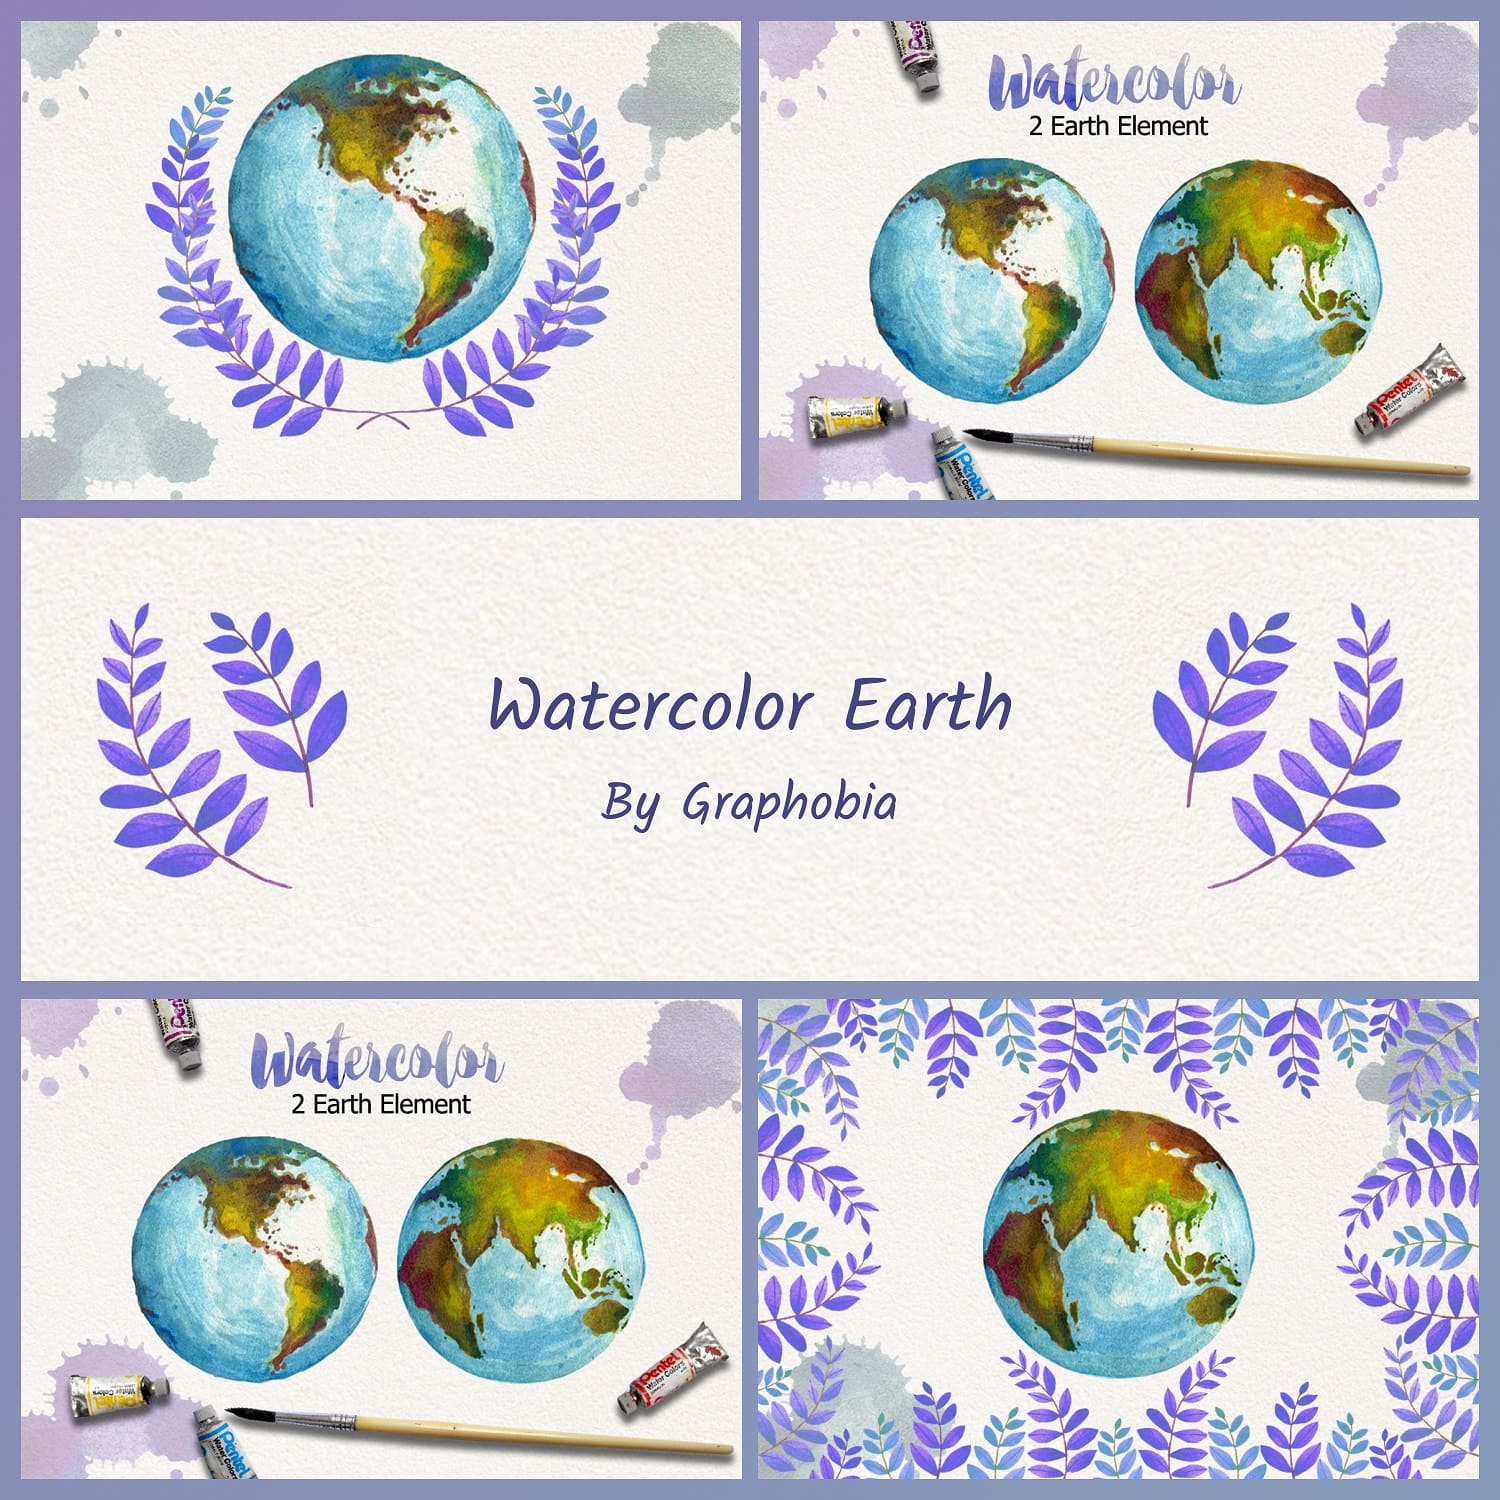 Watercolor Earth by Graphobia.